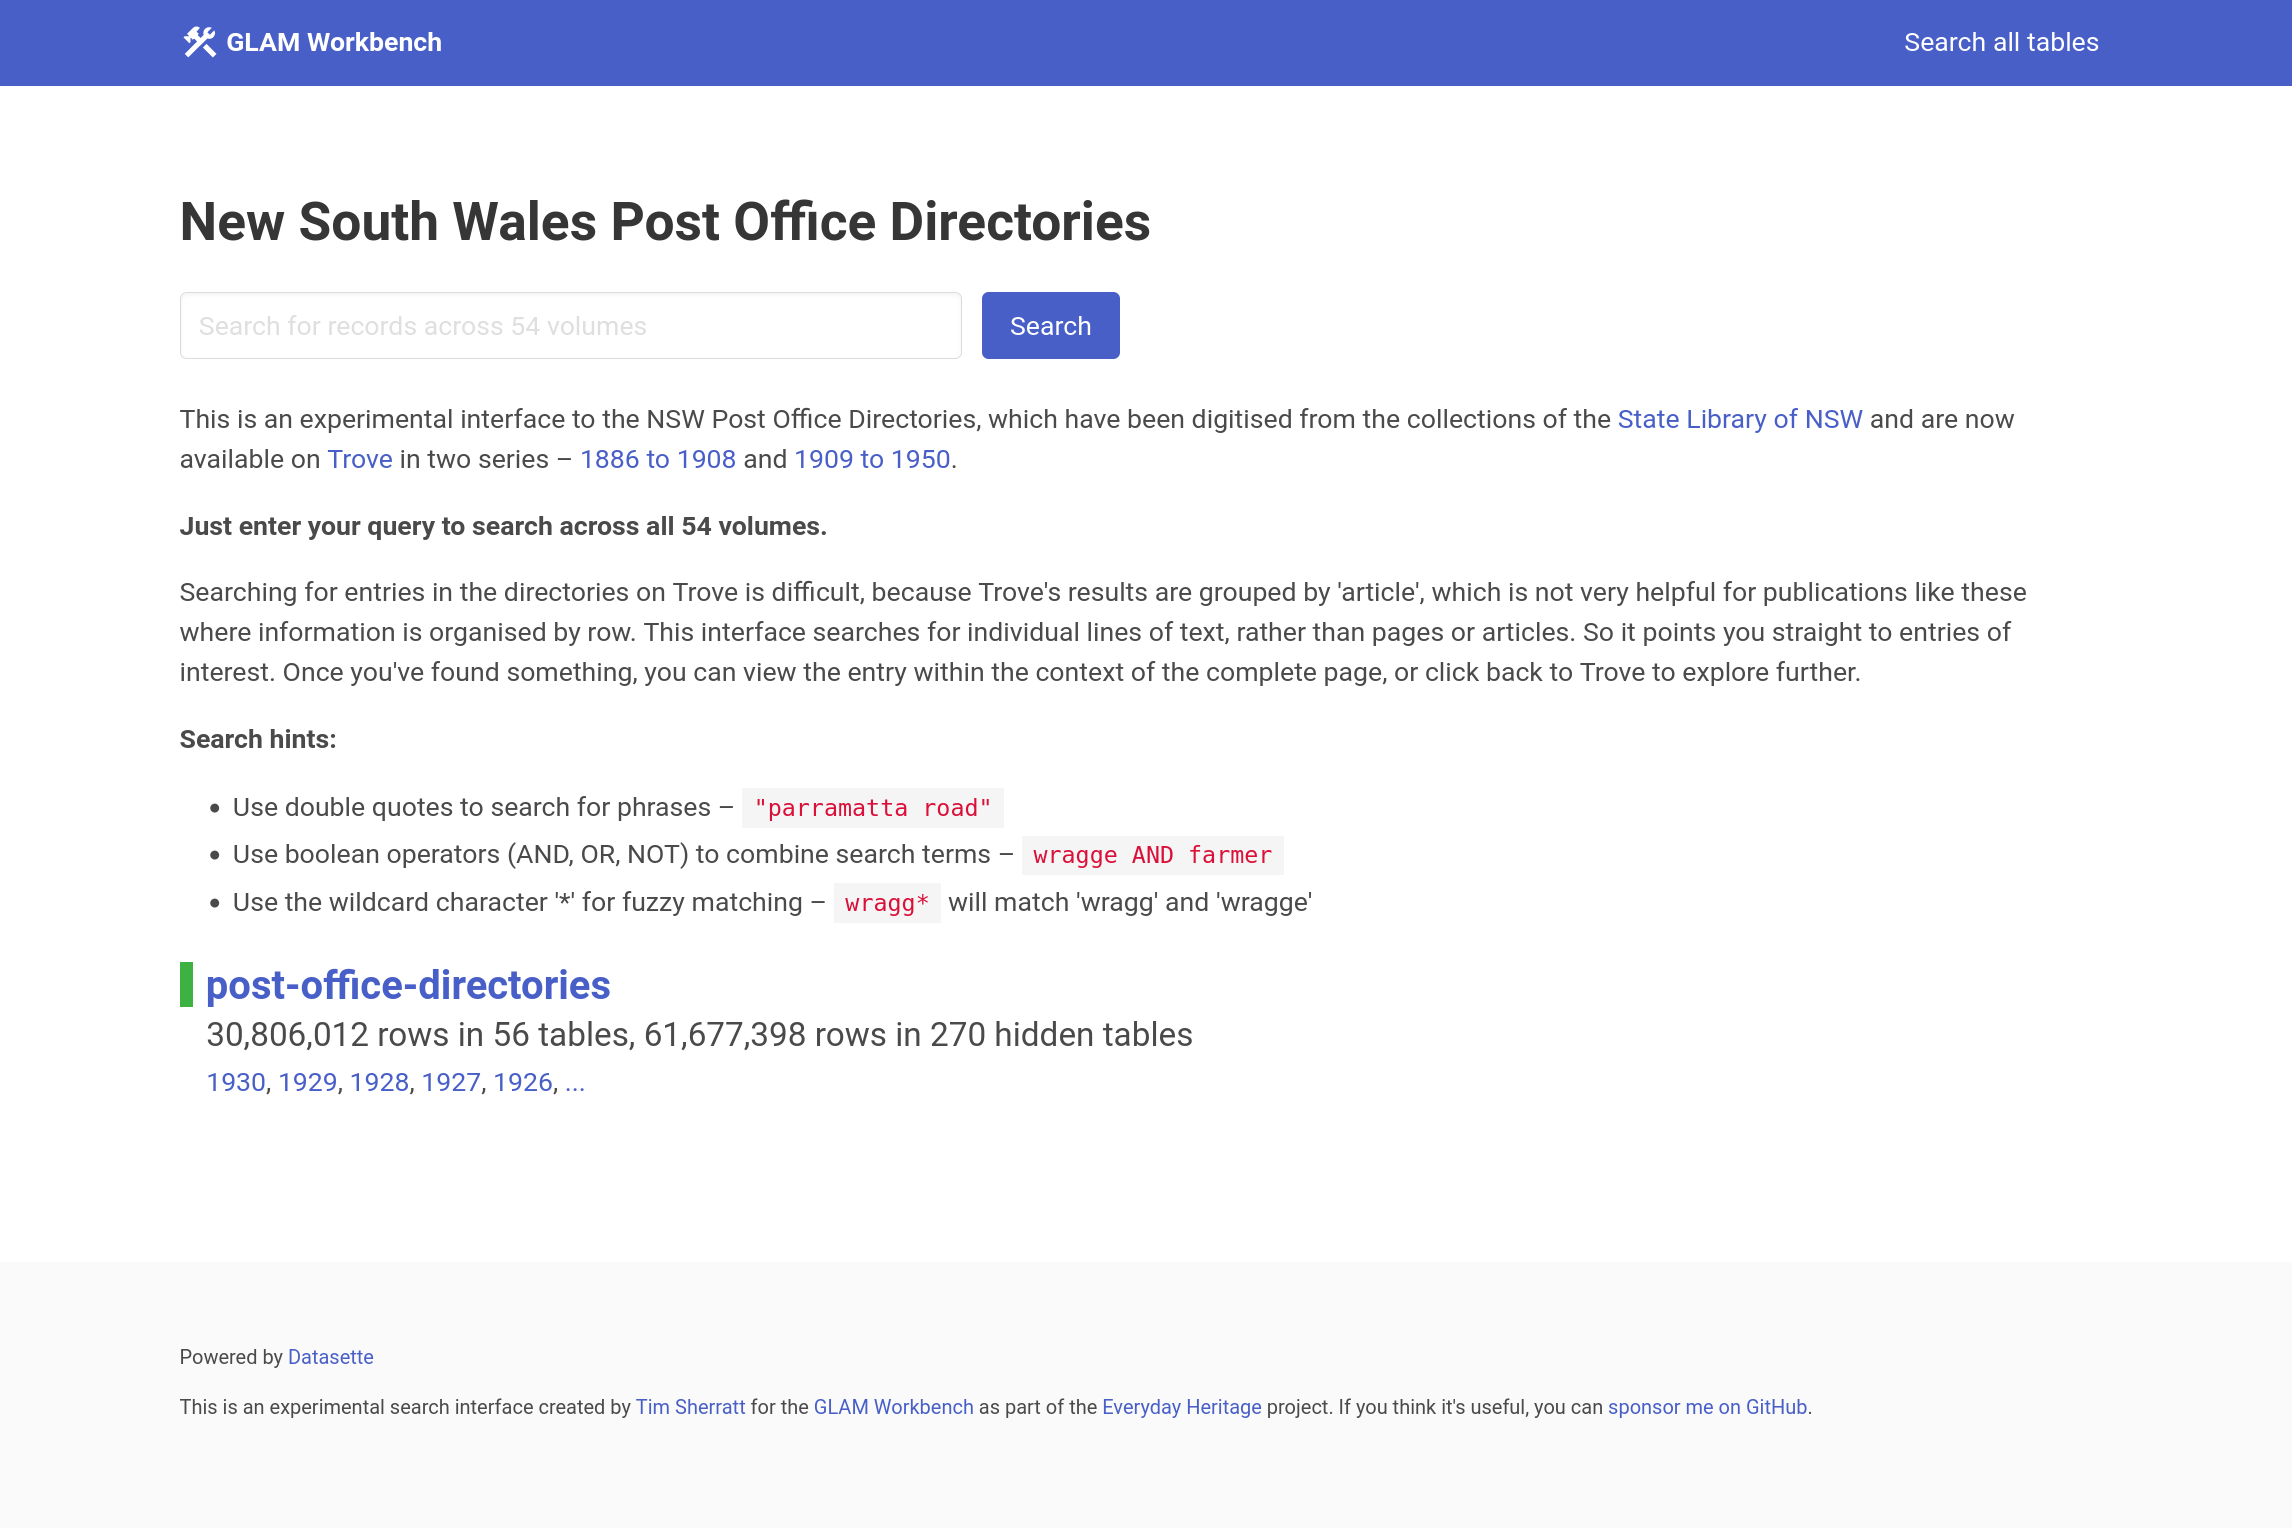 Screenshot of home page for the NSW Post Office Directories. There’s a search box to search across all 54 volumes, some search tips, and a summary of the data that notes there are more than 30 million rows.